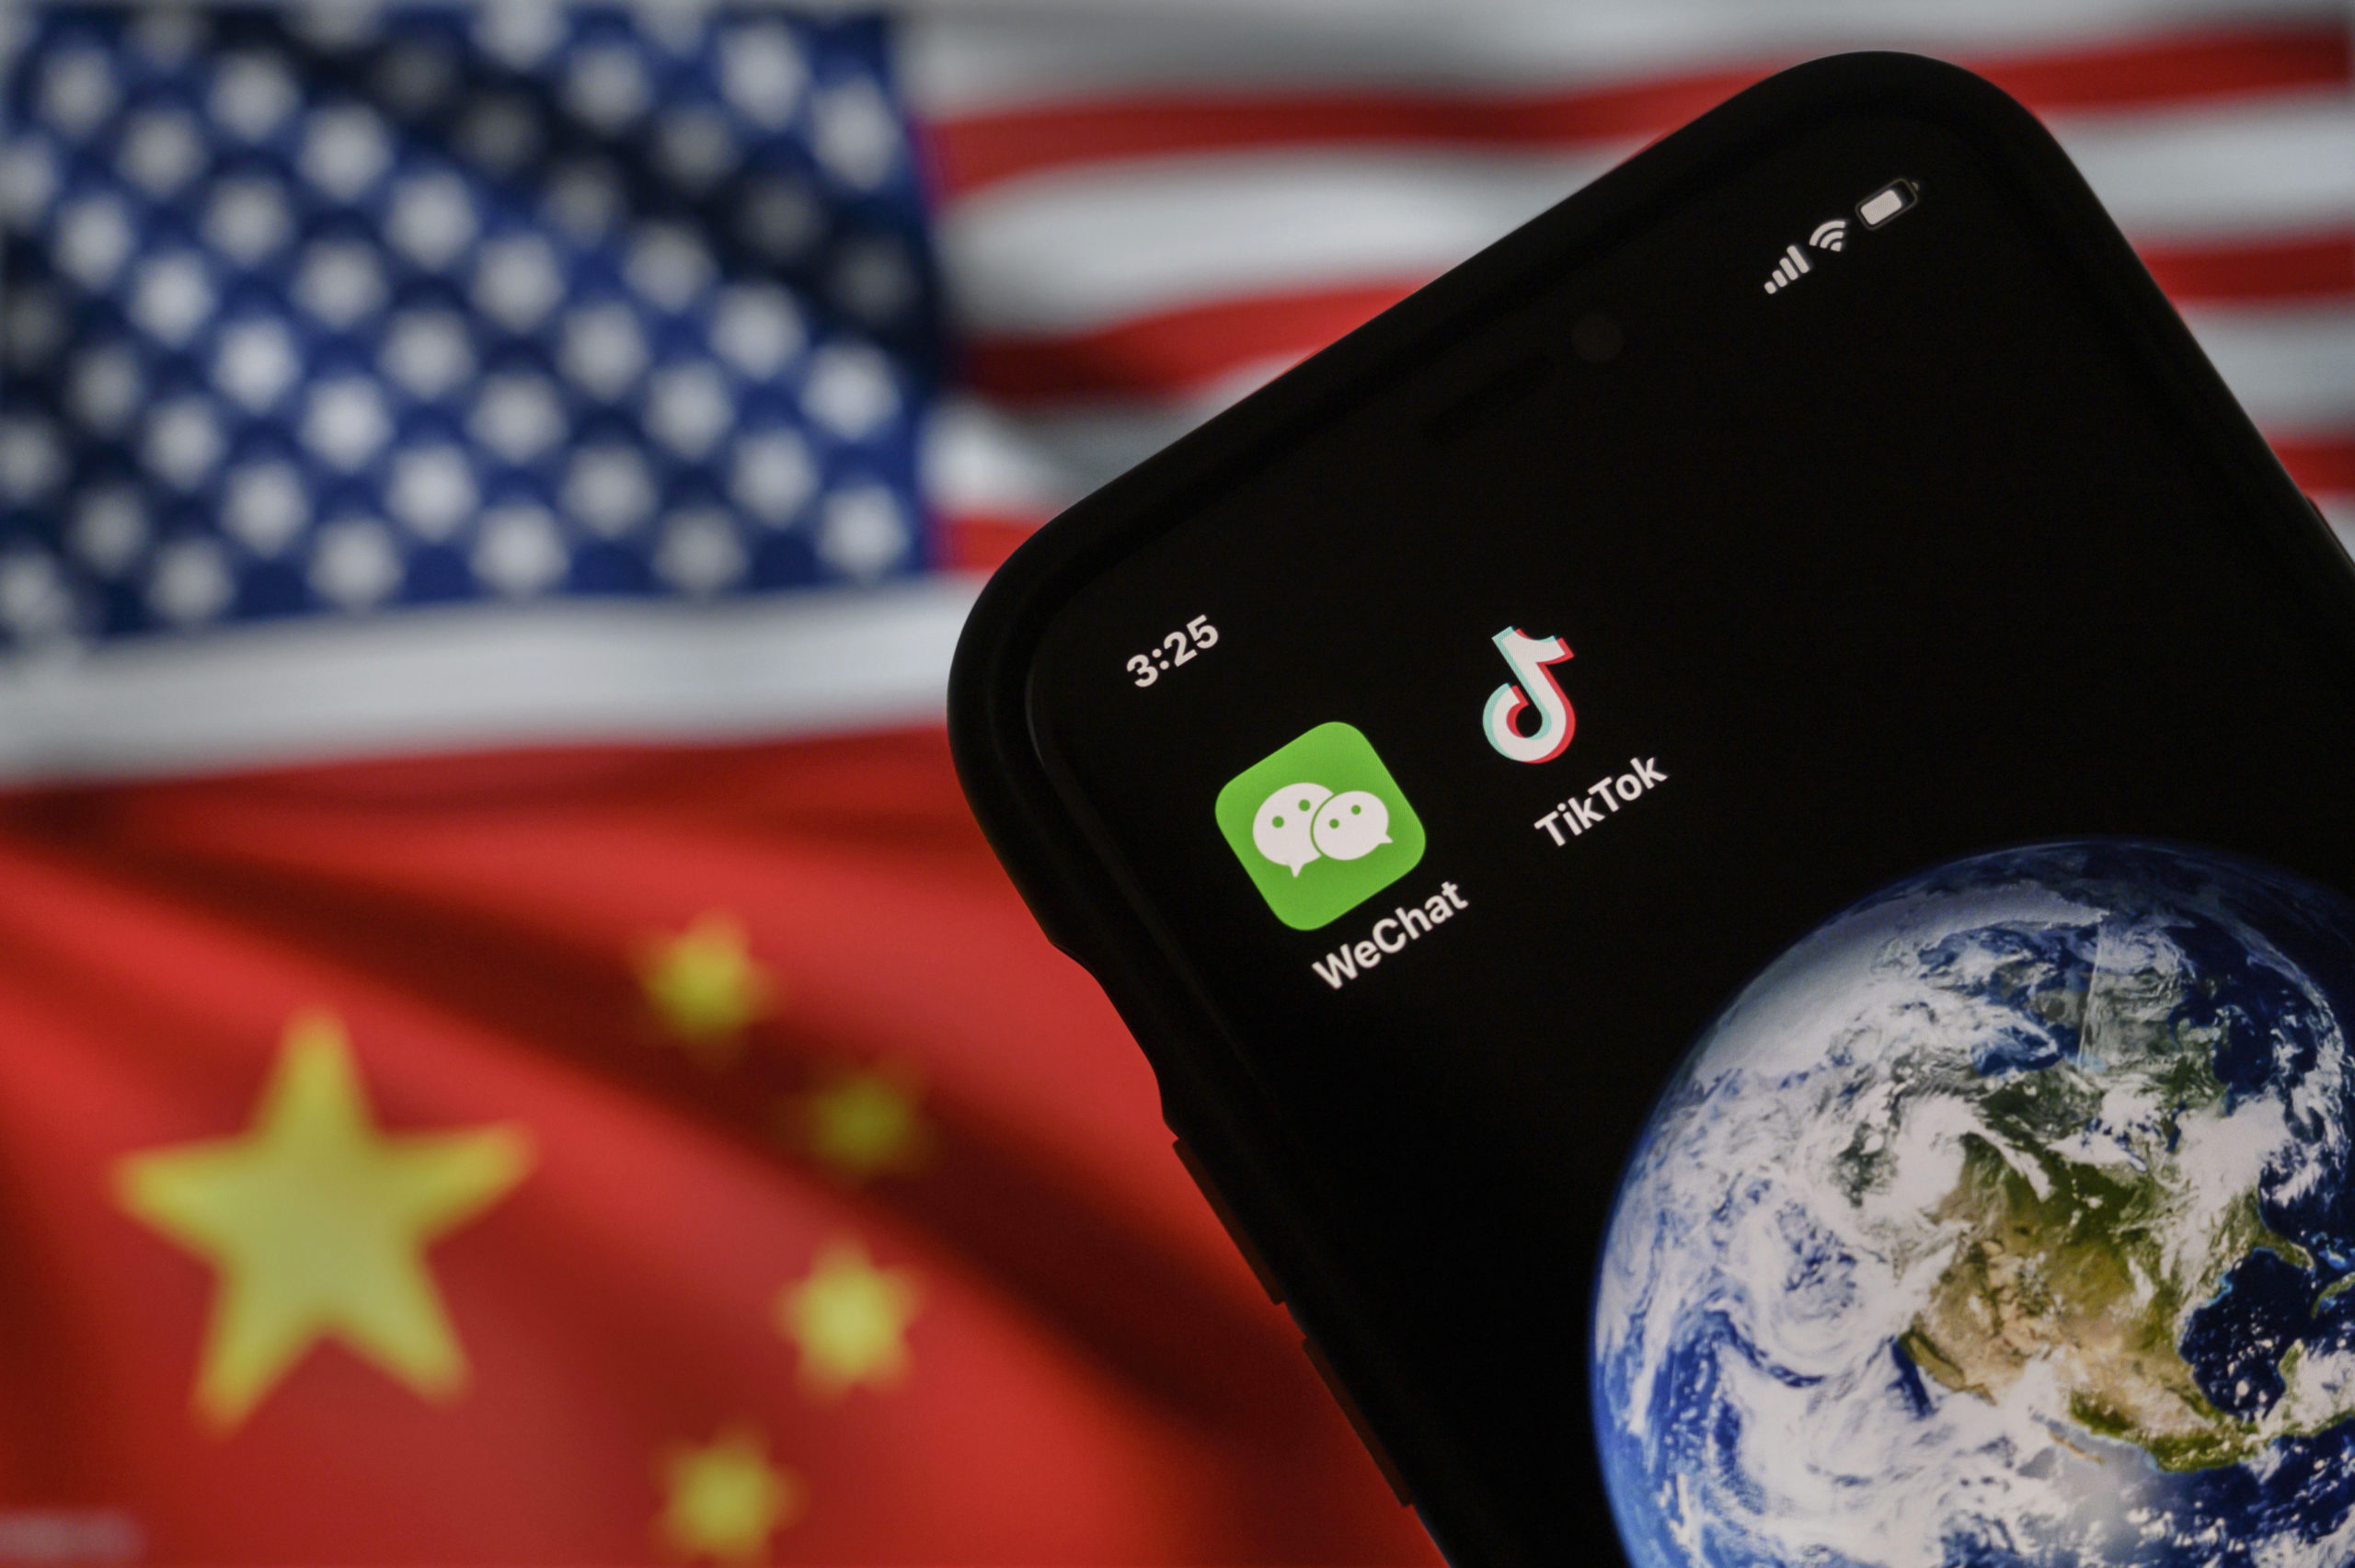 In this photo illustration, a mobile phone can be seen displaying the logos for Chinese apps WeChat and TikTok in front of a monitor showing the flags of the United States and China on an internet page, on September 22, 2020 in Beijing, China. 